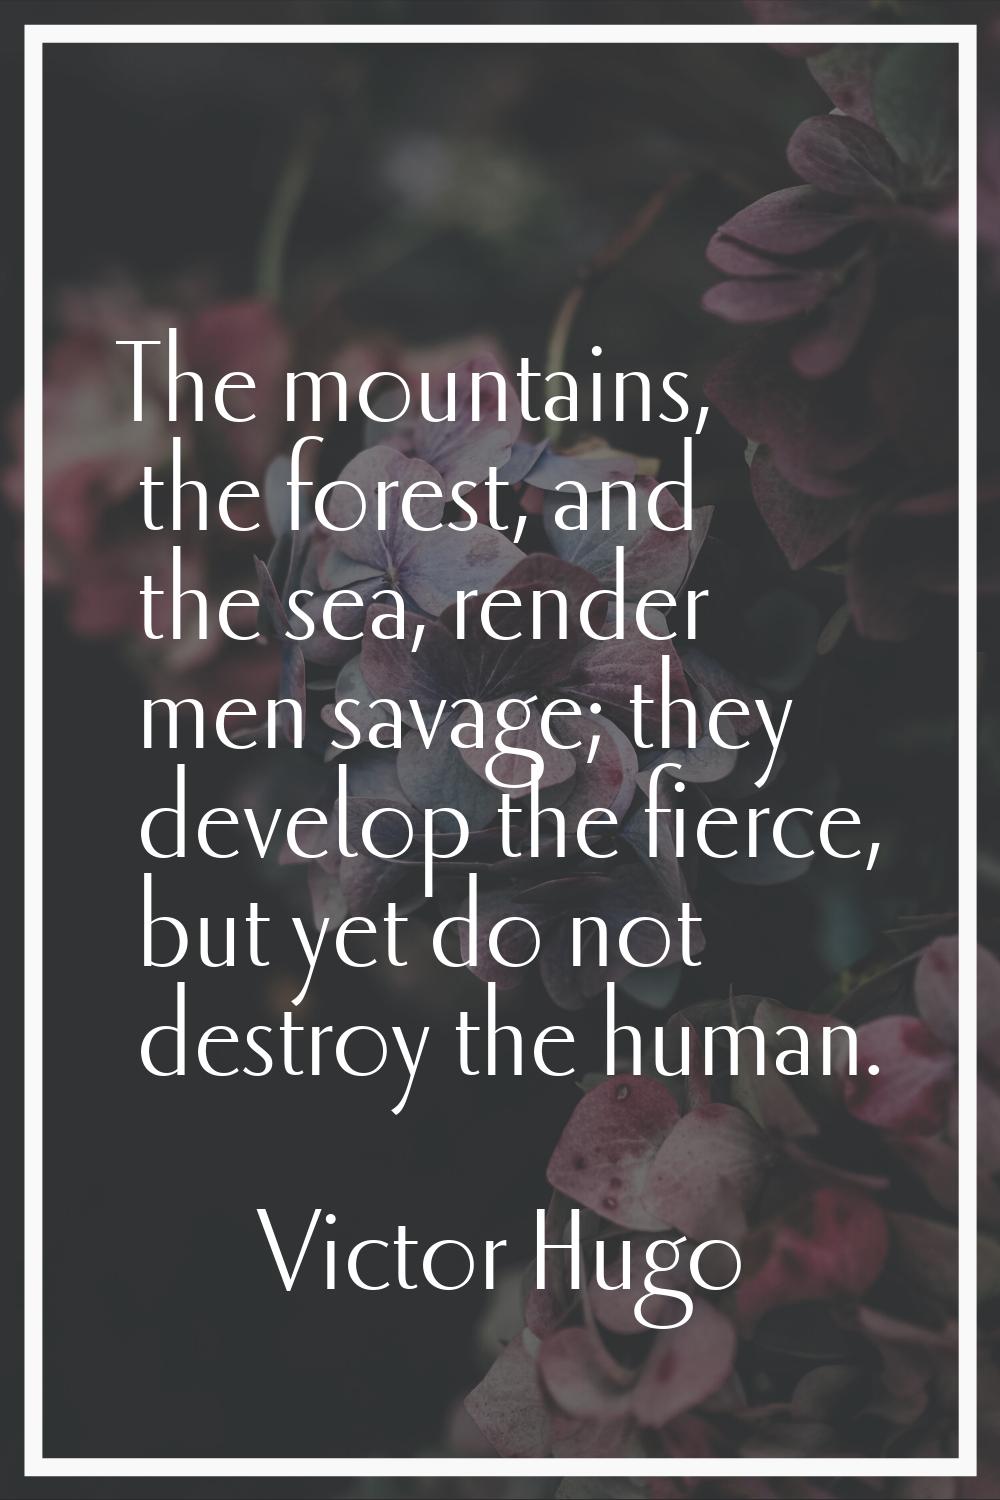 The mountains, the forest, and the sea, render men savage; they develop the fierce, but yet do not 